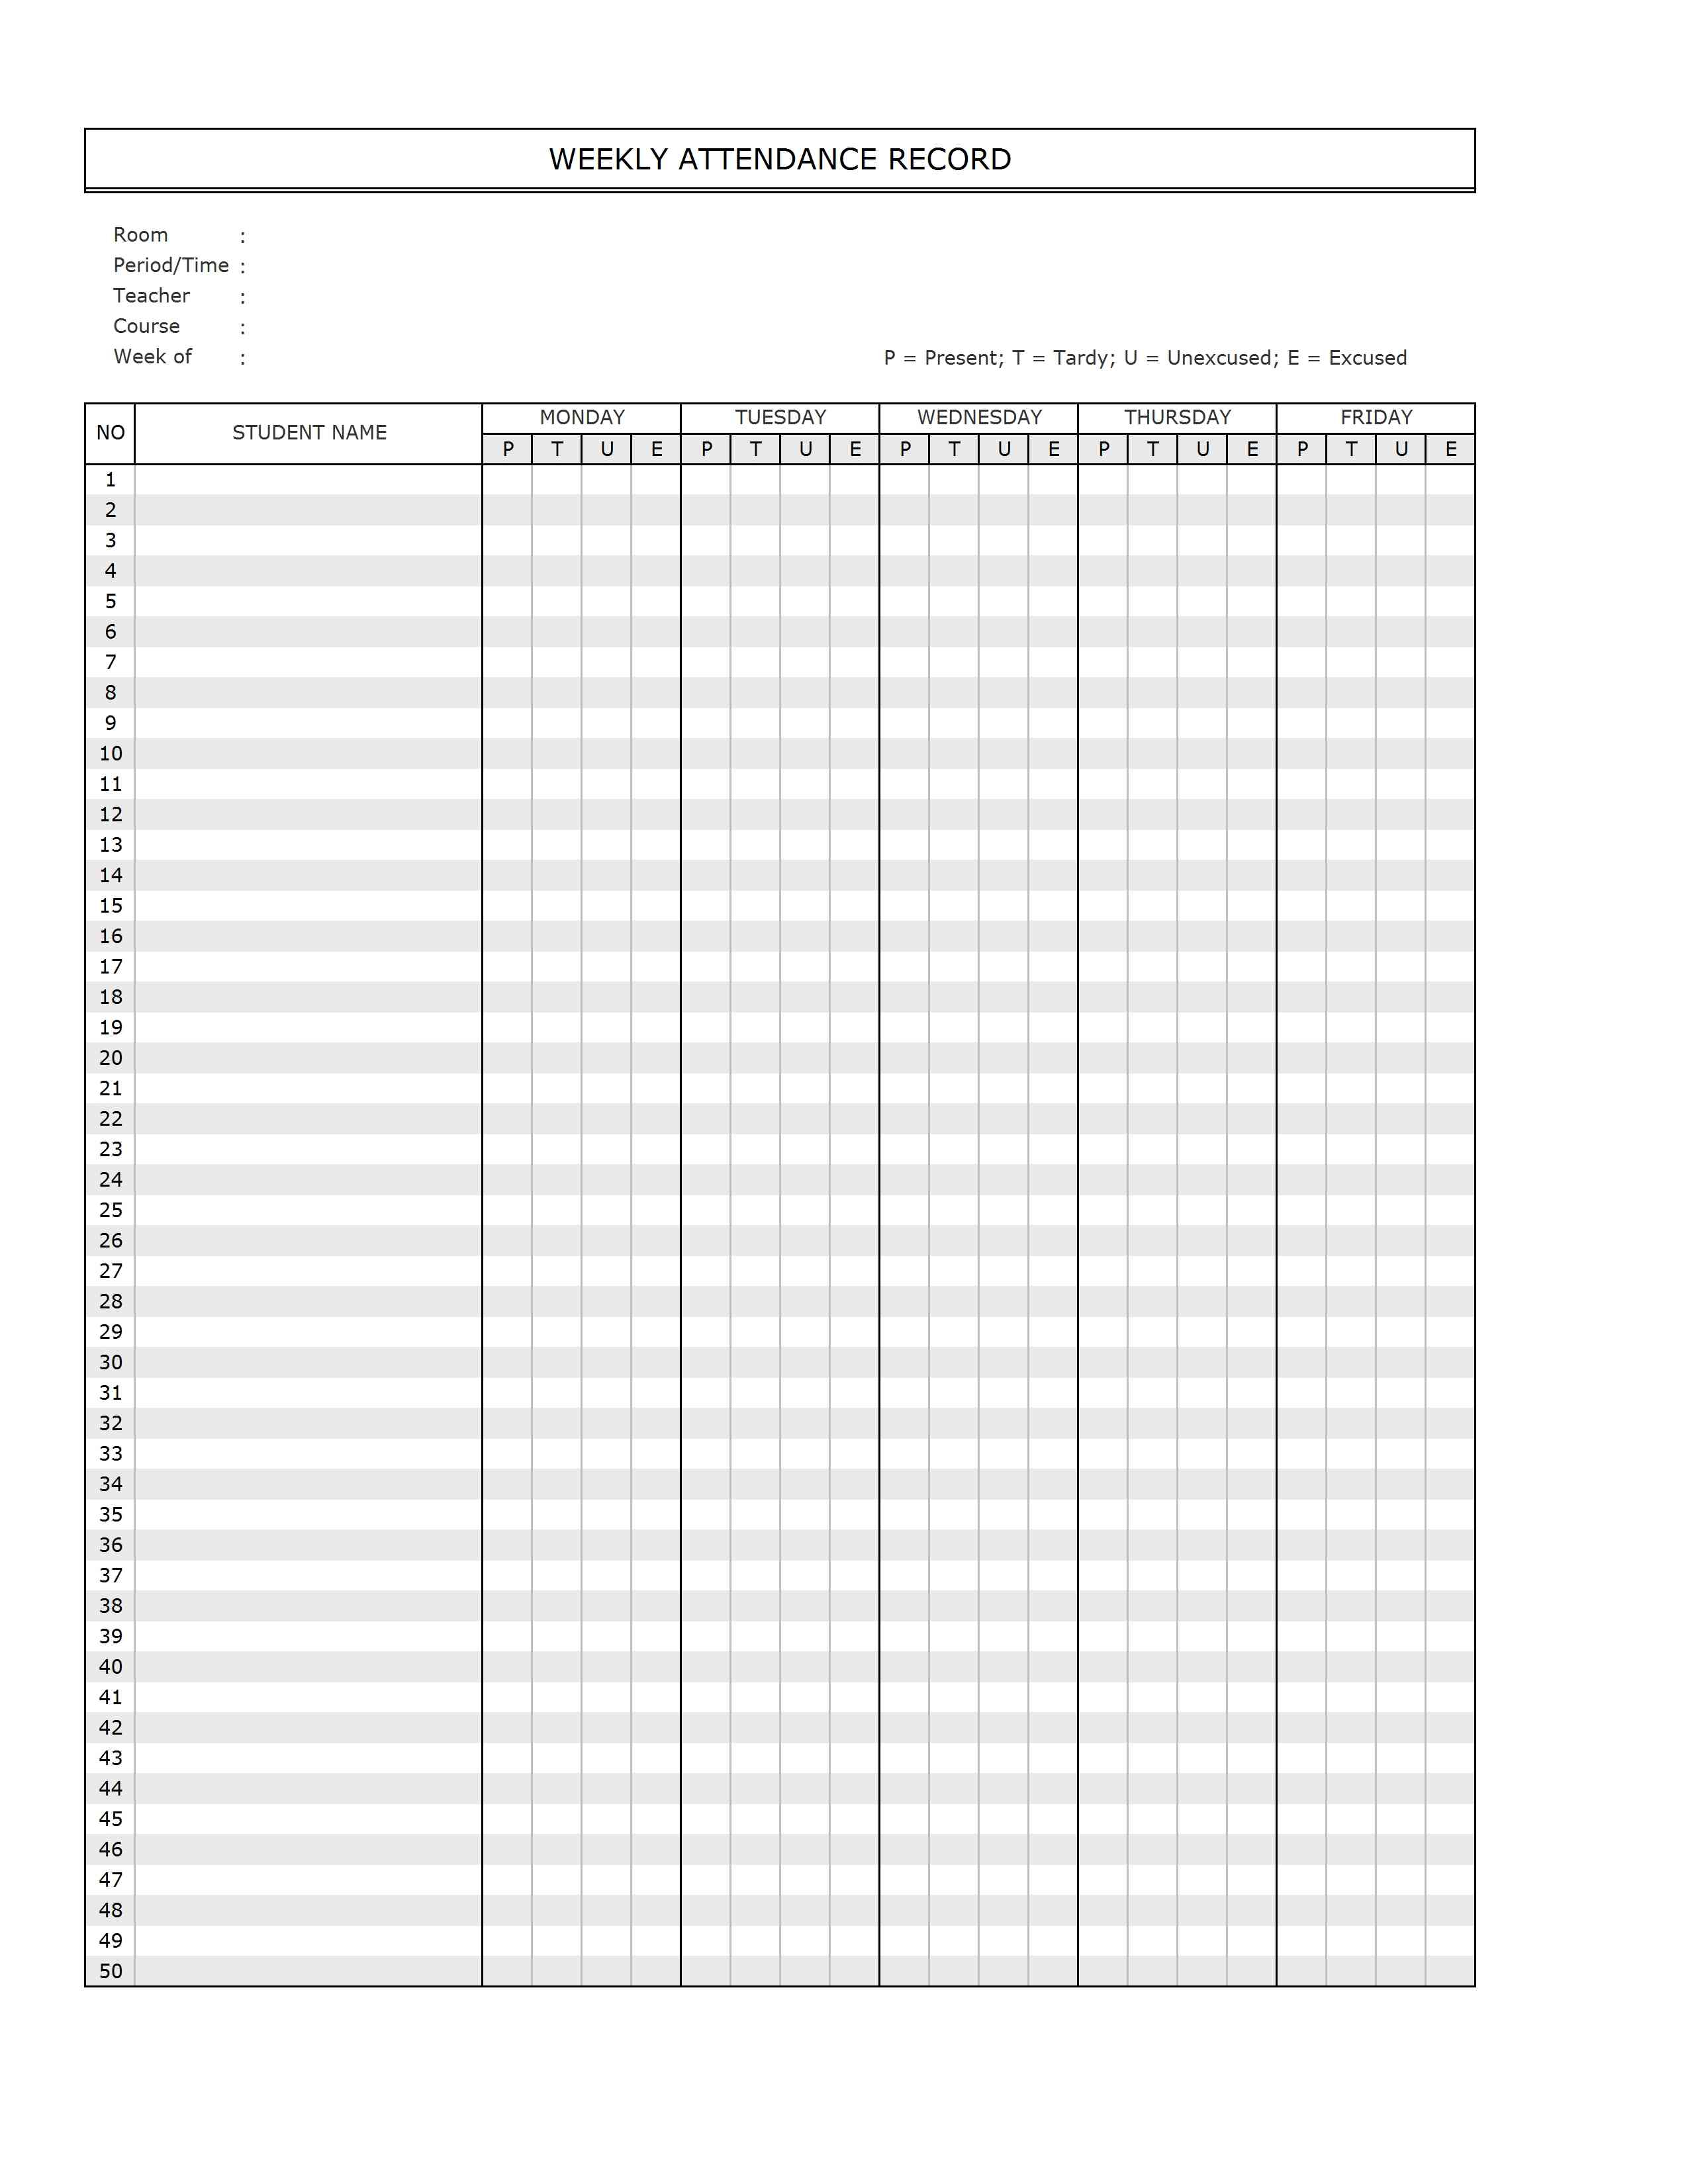 Attendance Spreadsheet Template Excel Intended For Printableendance Sheets Templates Samples Employee Yearly Sheet